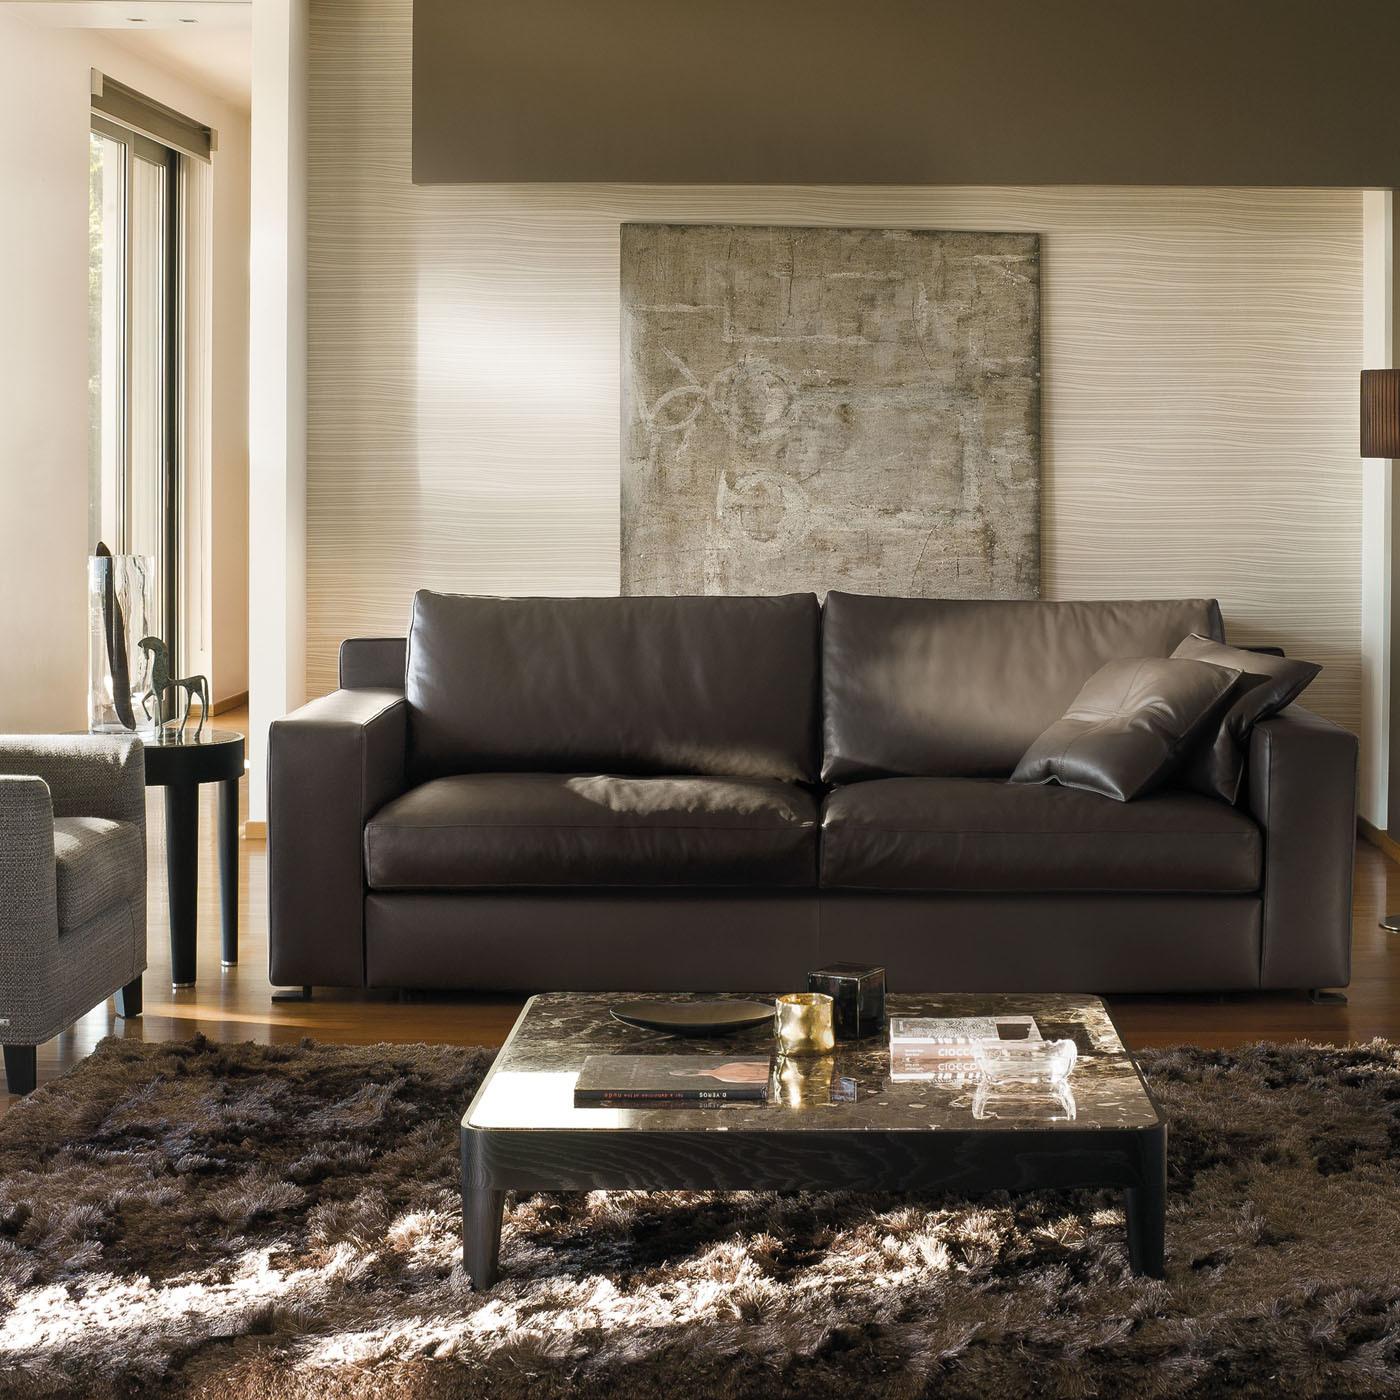 mocha leather couch